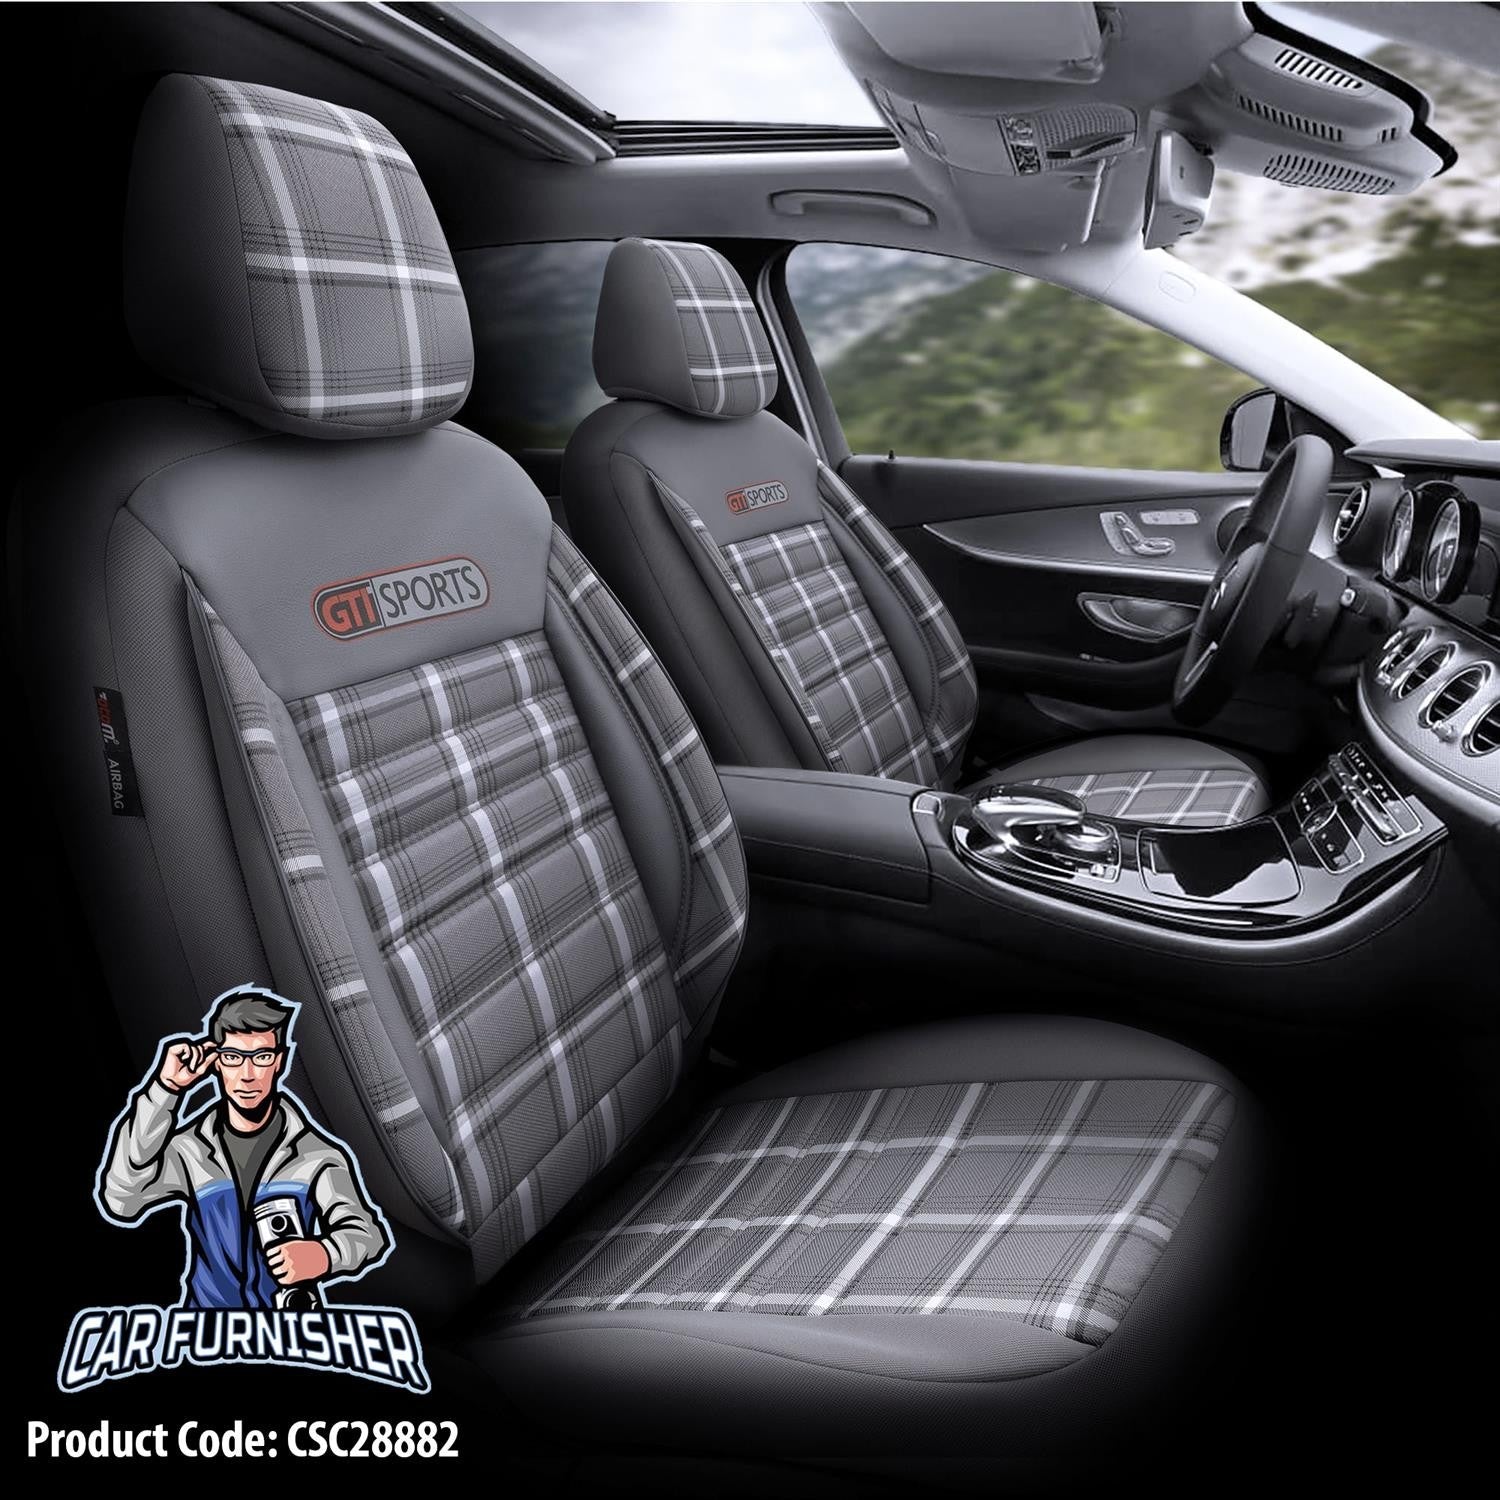 VW Golf GTI Car Seat Covers MK4/MK5/MK6/MK7 1998-2020 Special Series Gray Leather & Fabric